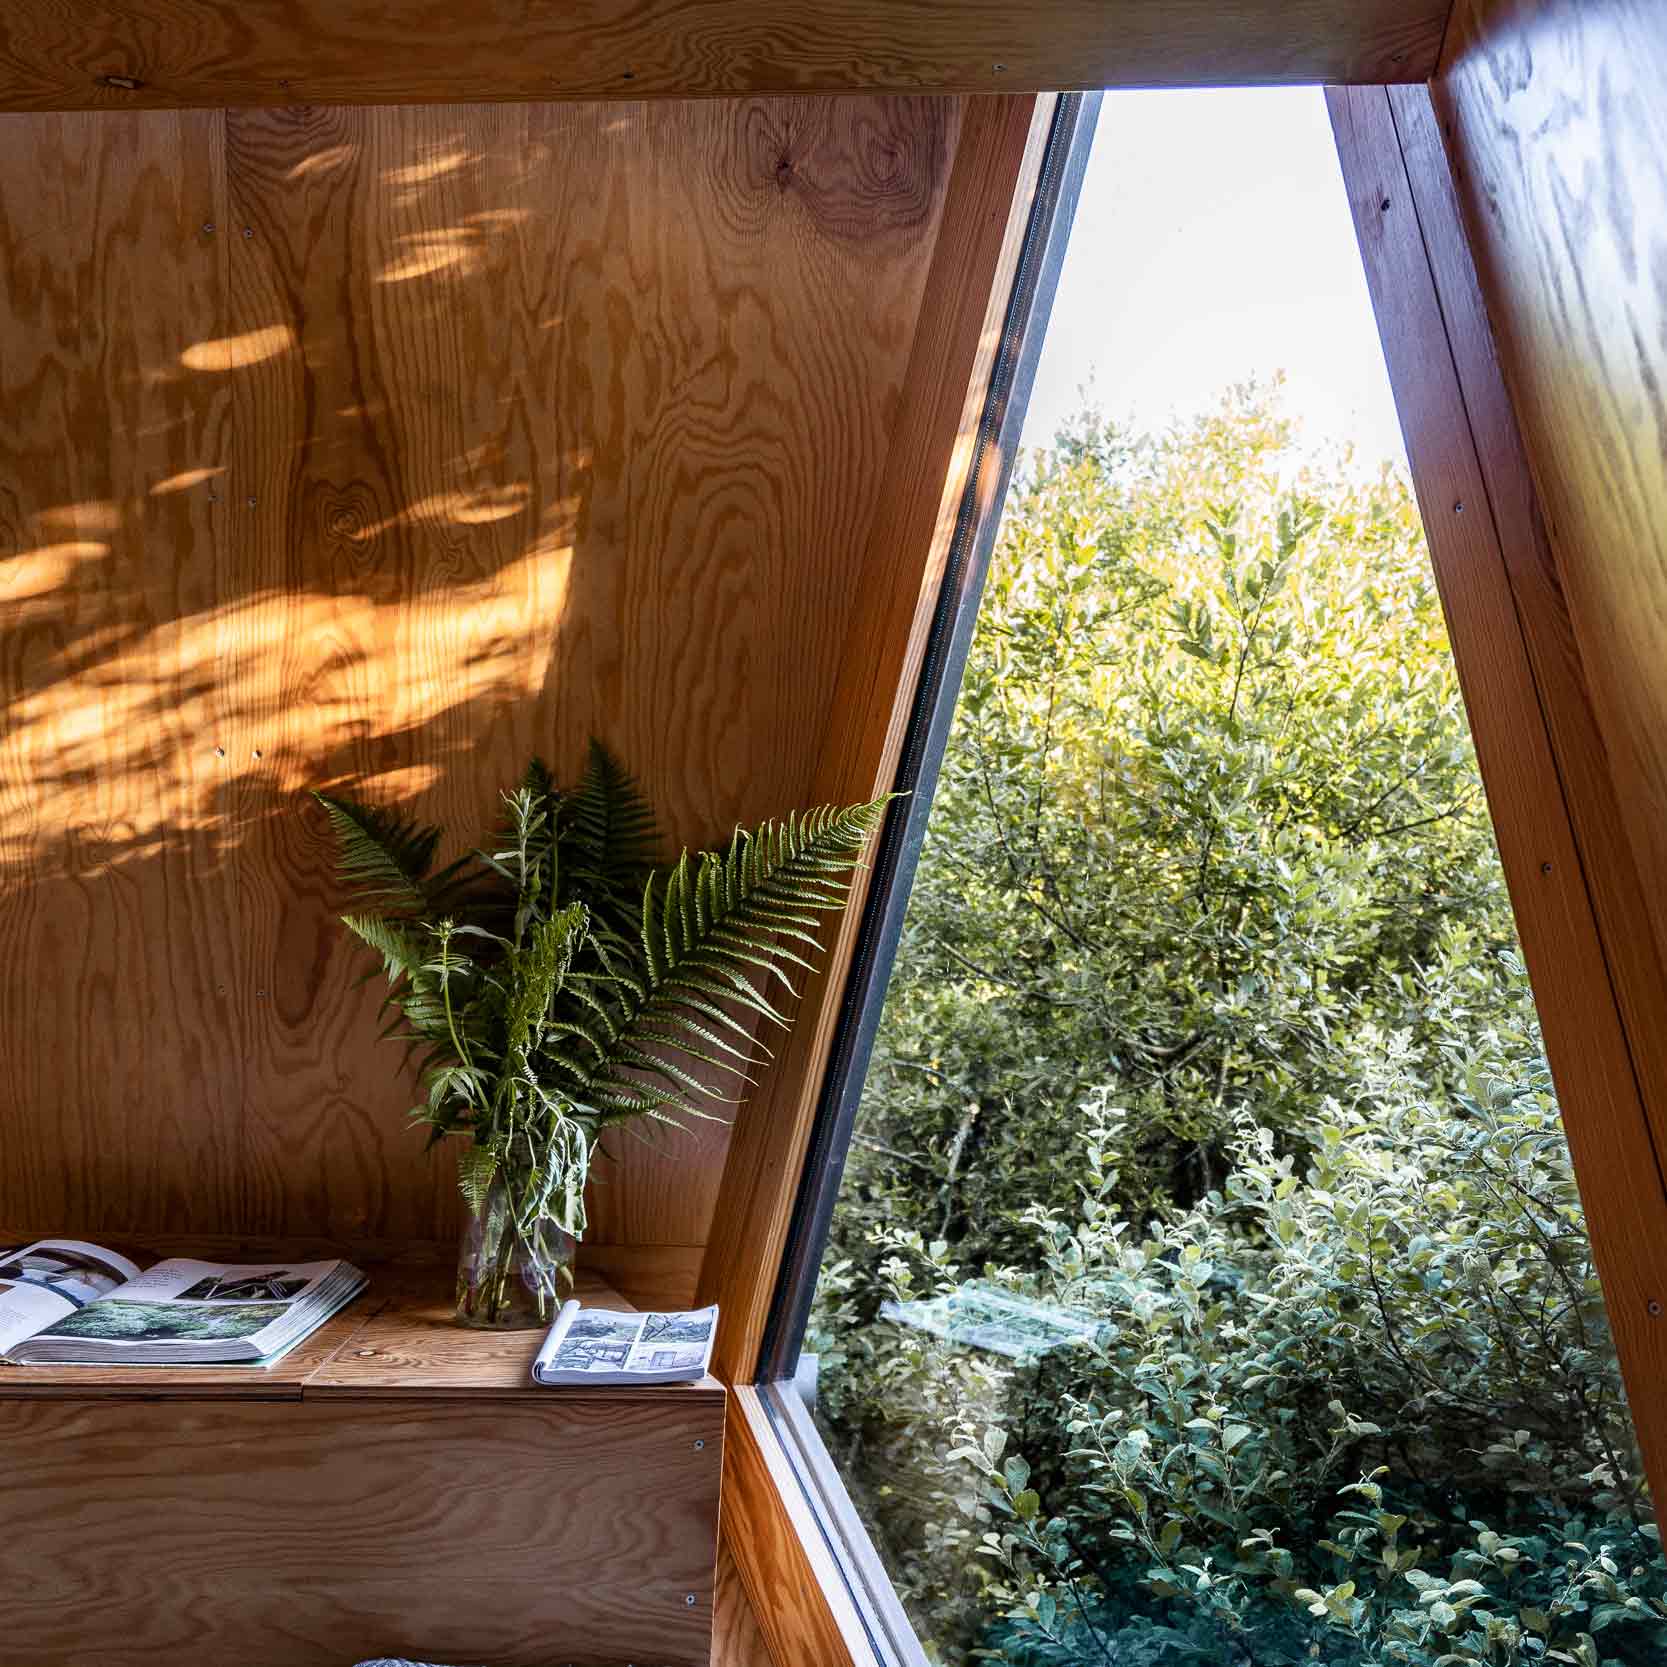 sunlight streaming through the window of K3 Kudhva cabin, surrounded by Cornish woodland